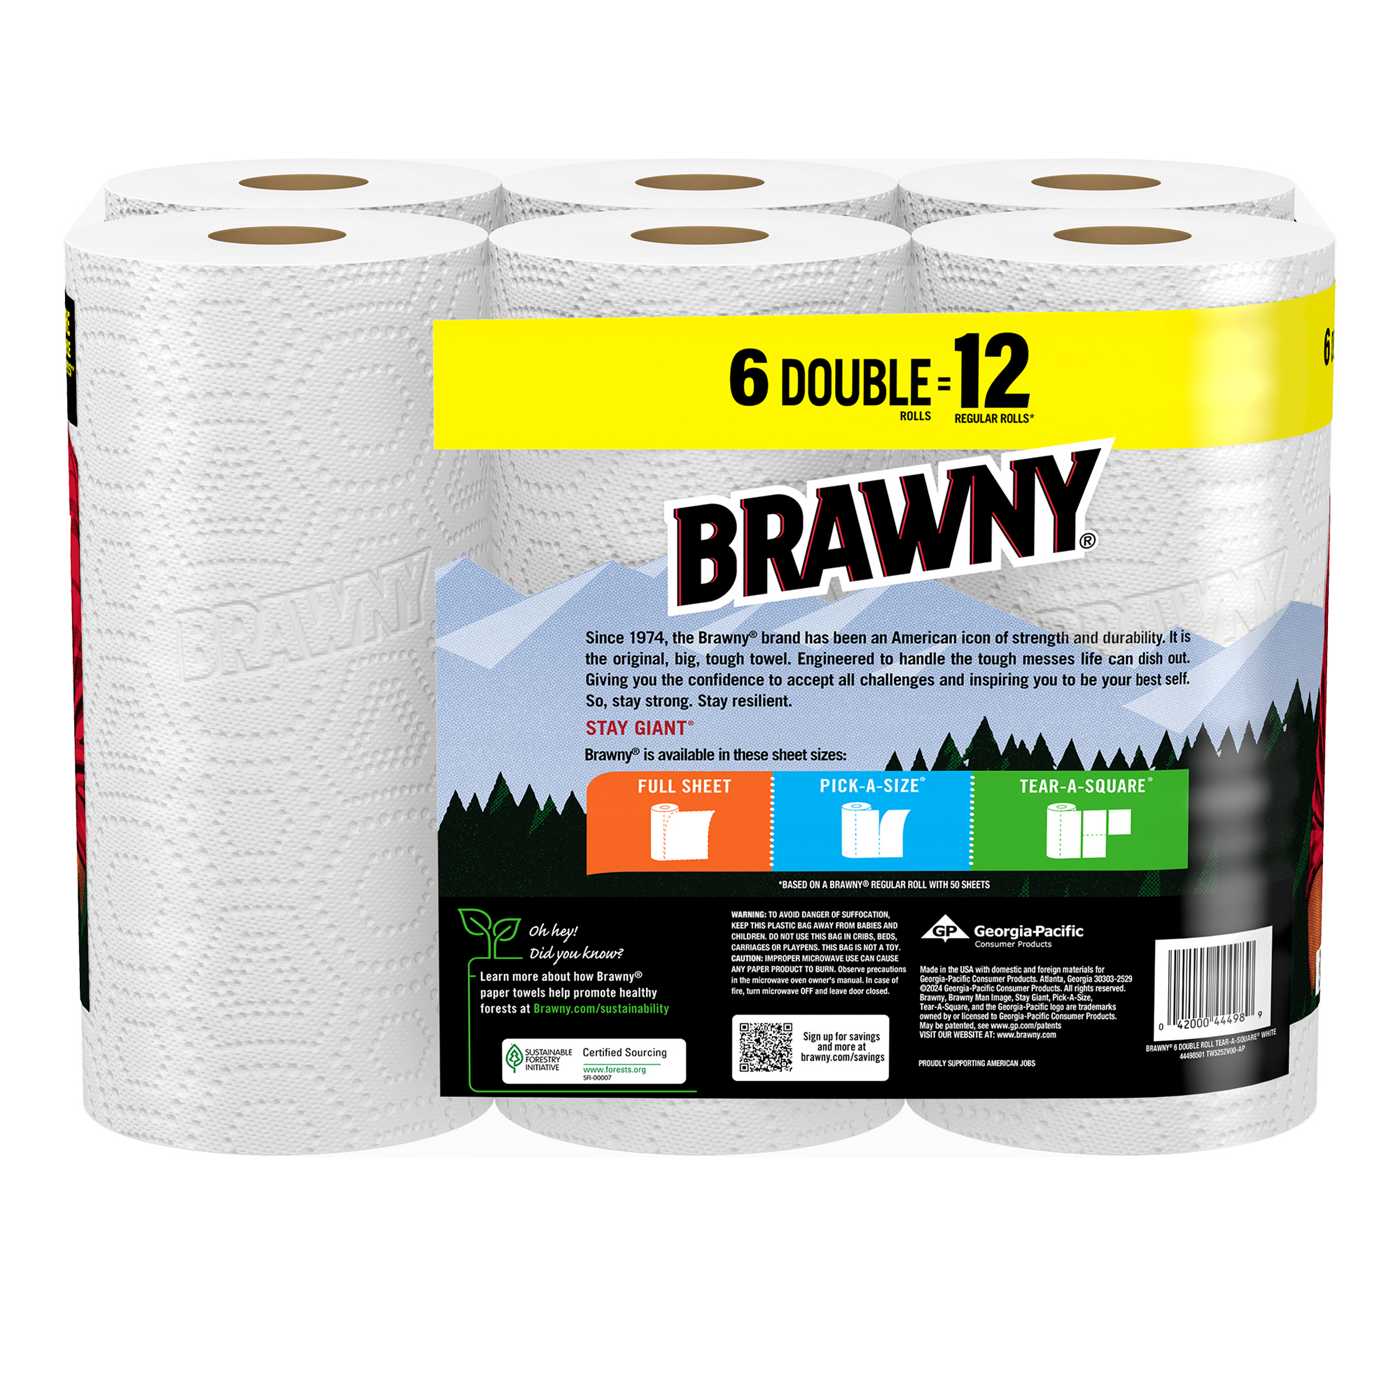 Brawny Tear-A-Square Paper Towels; image 2 of 2